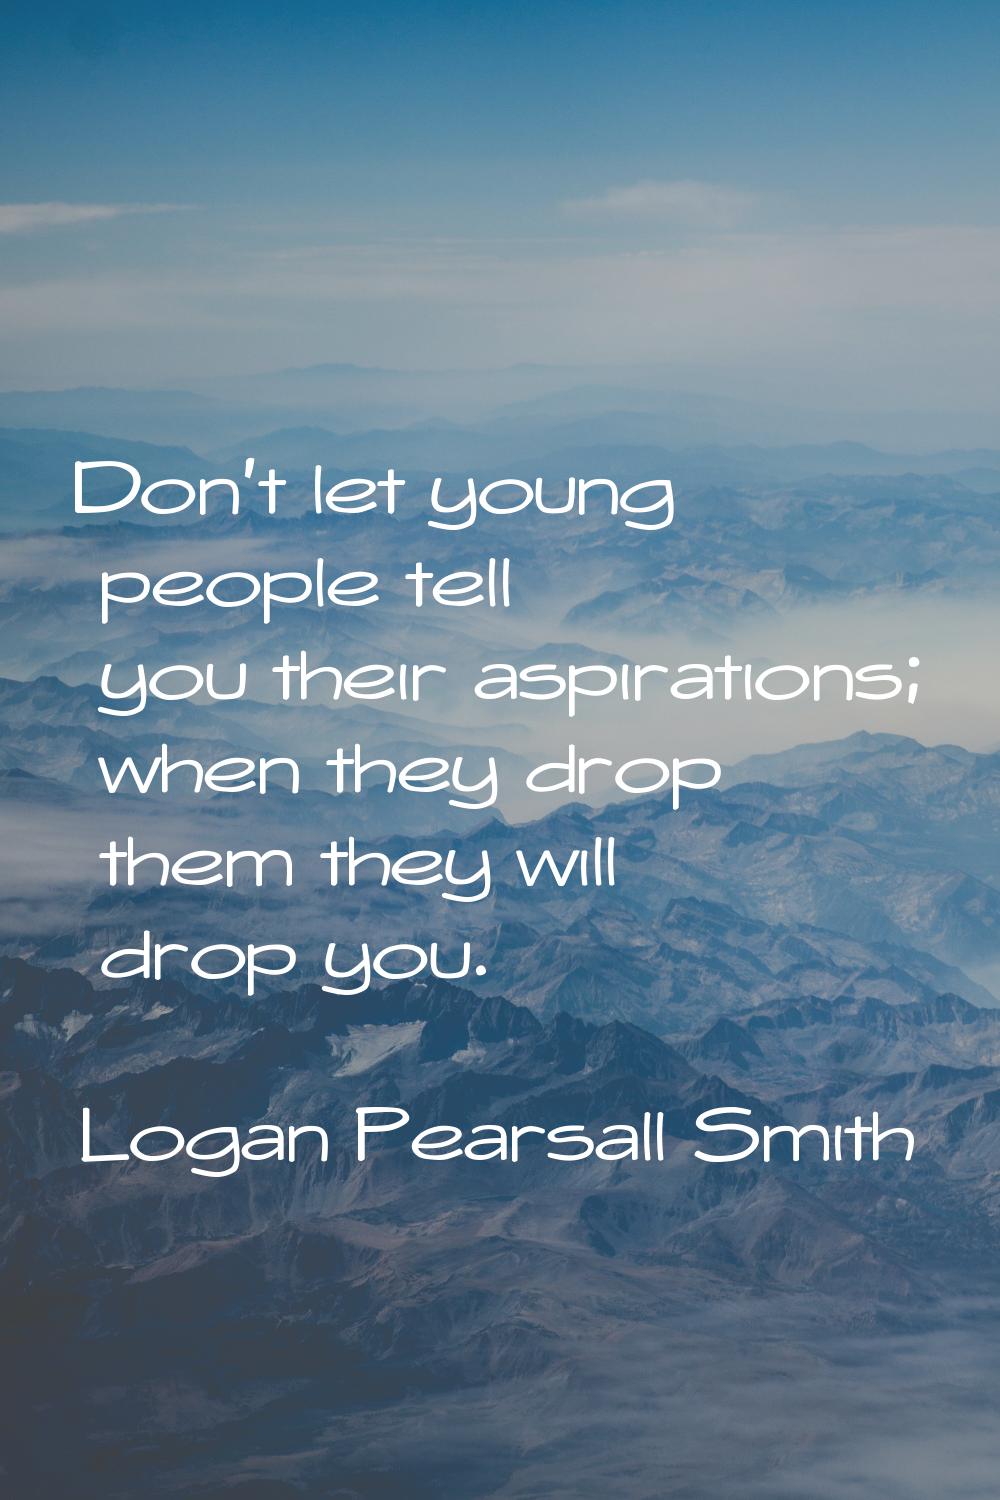 Don't let young people tell you their aspirations; when they drop them they will drop you.